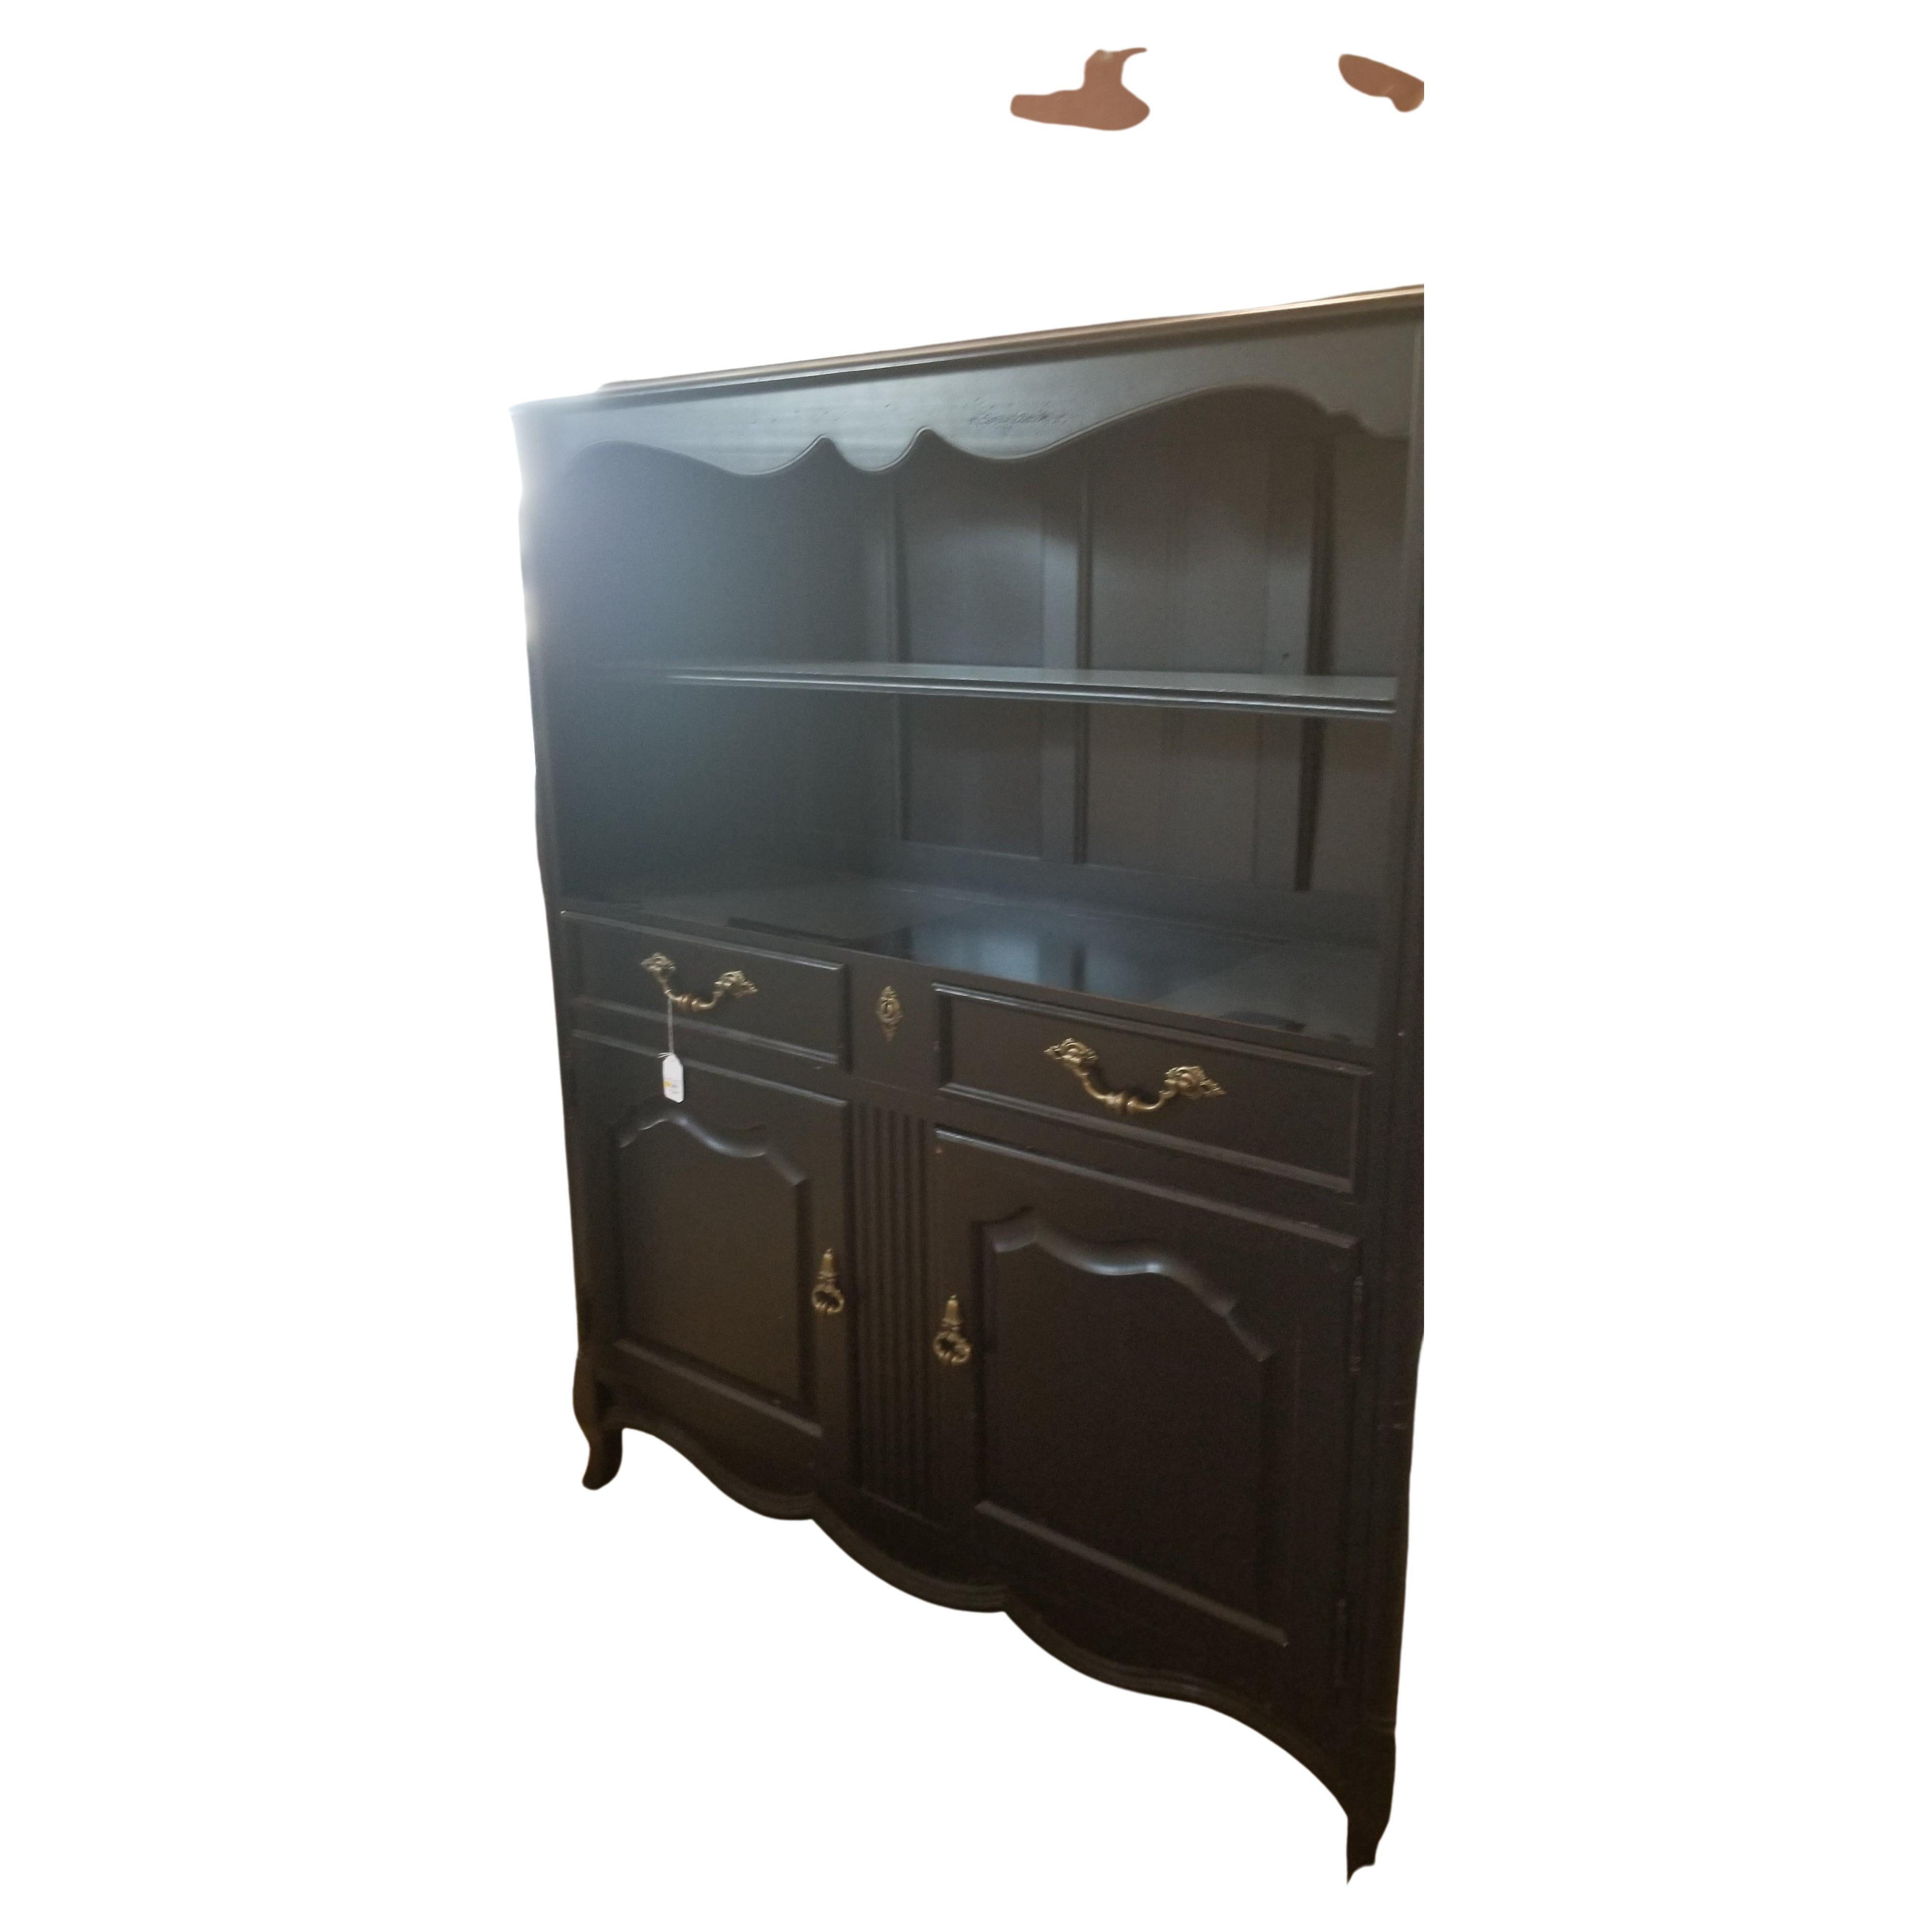 French Styled Open Bookcase/Credenza For Sale